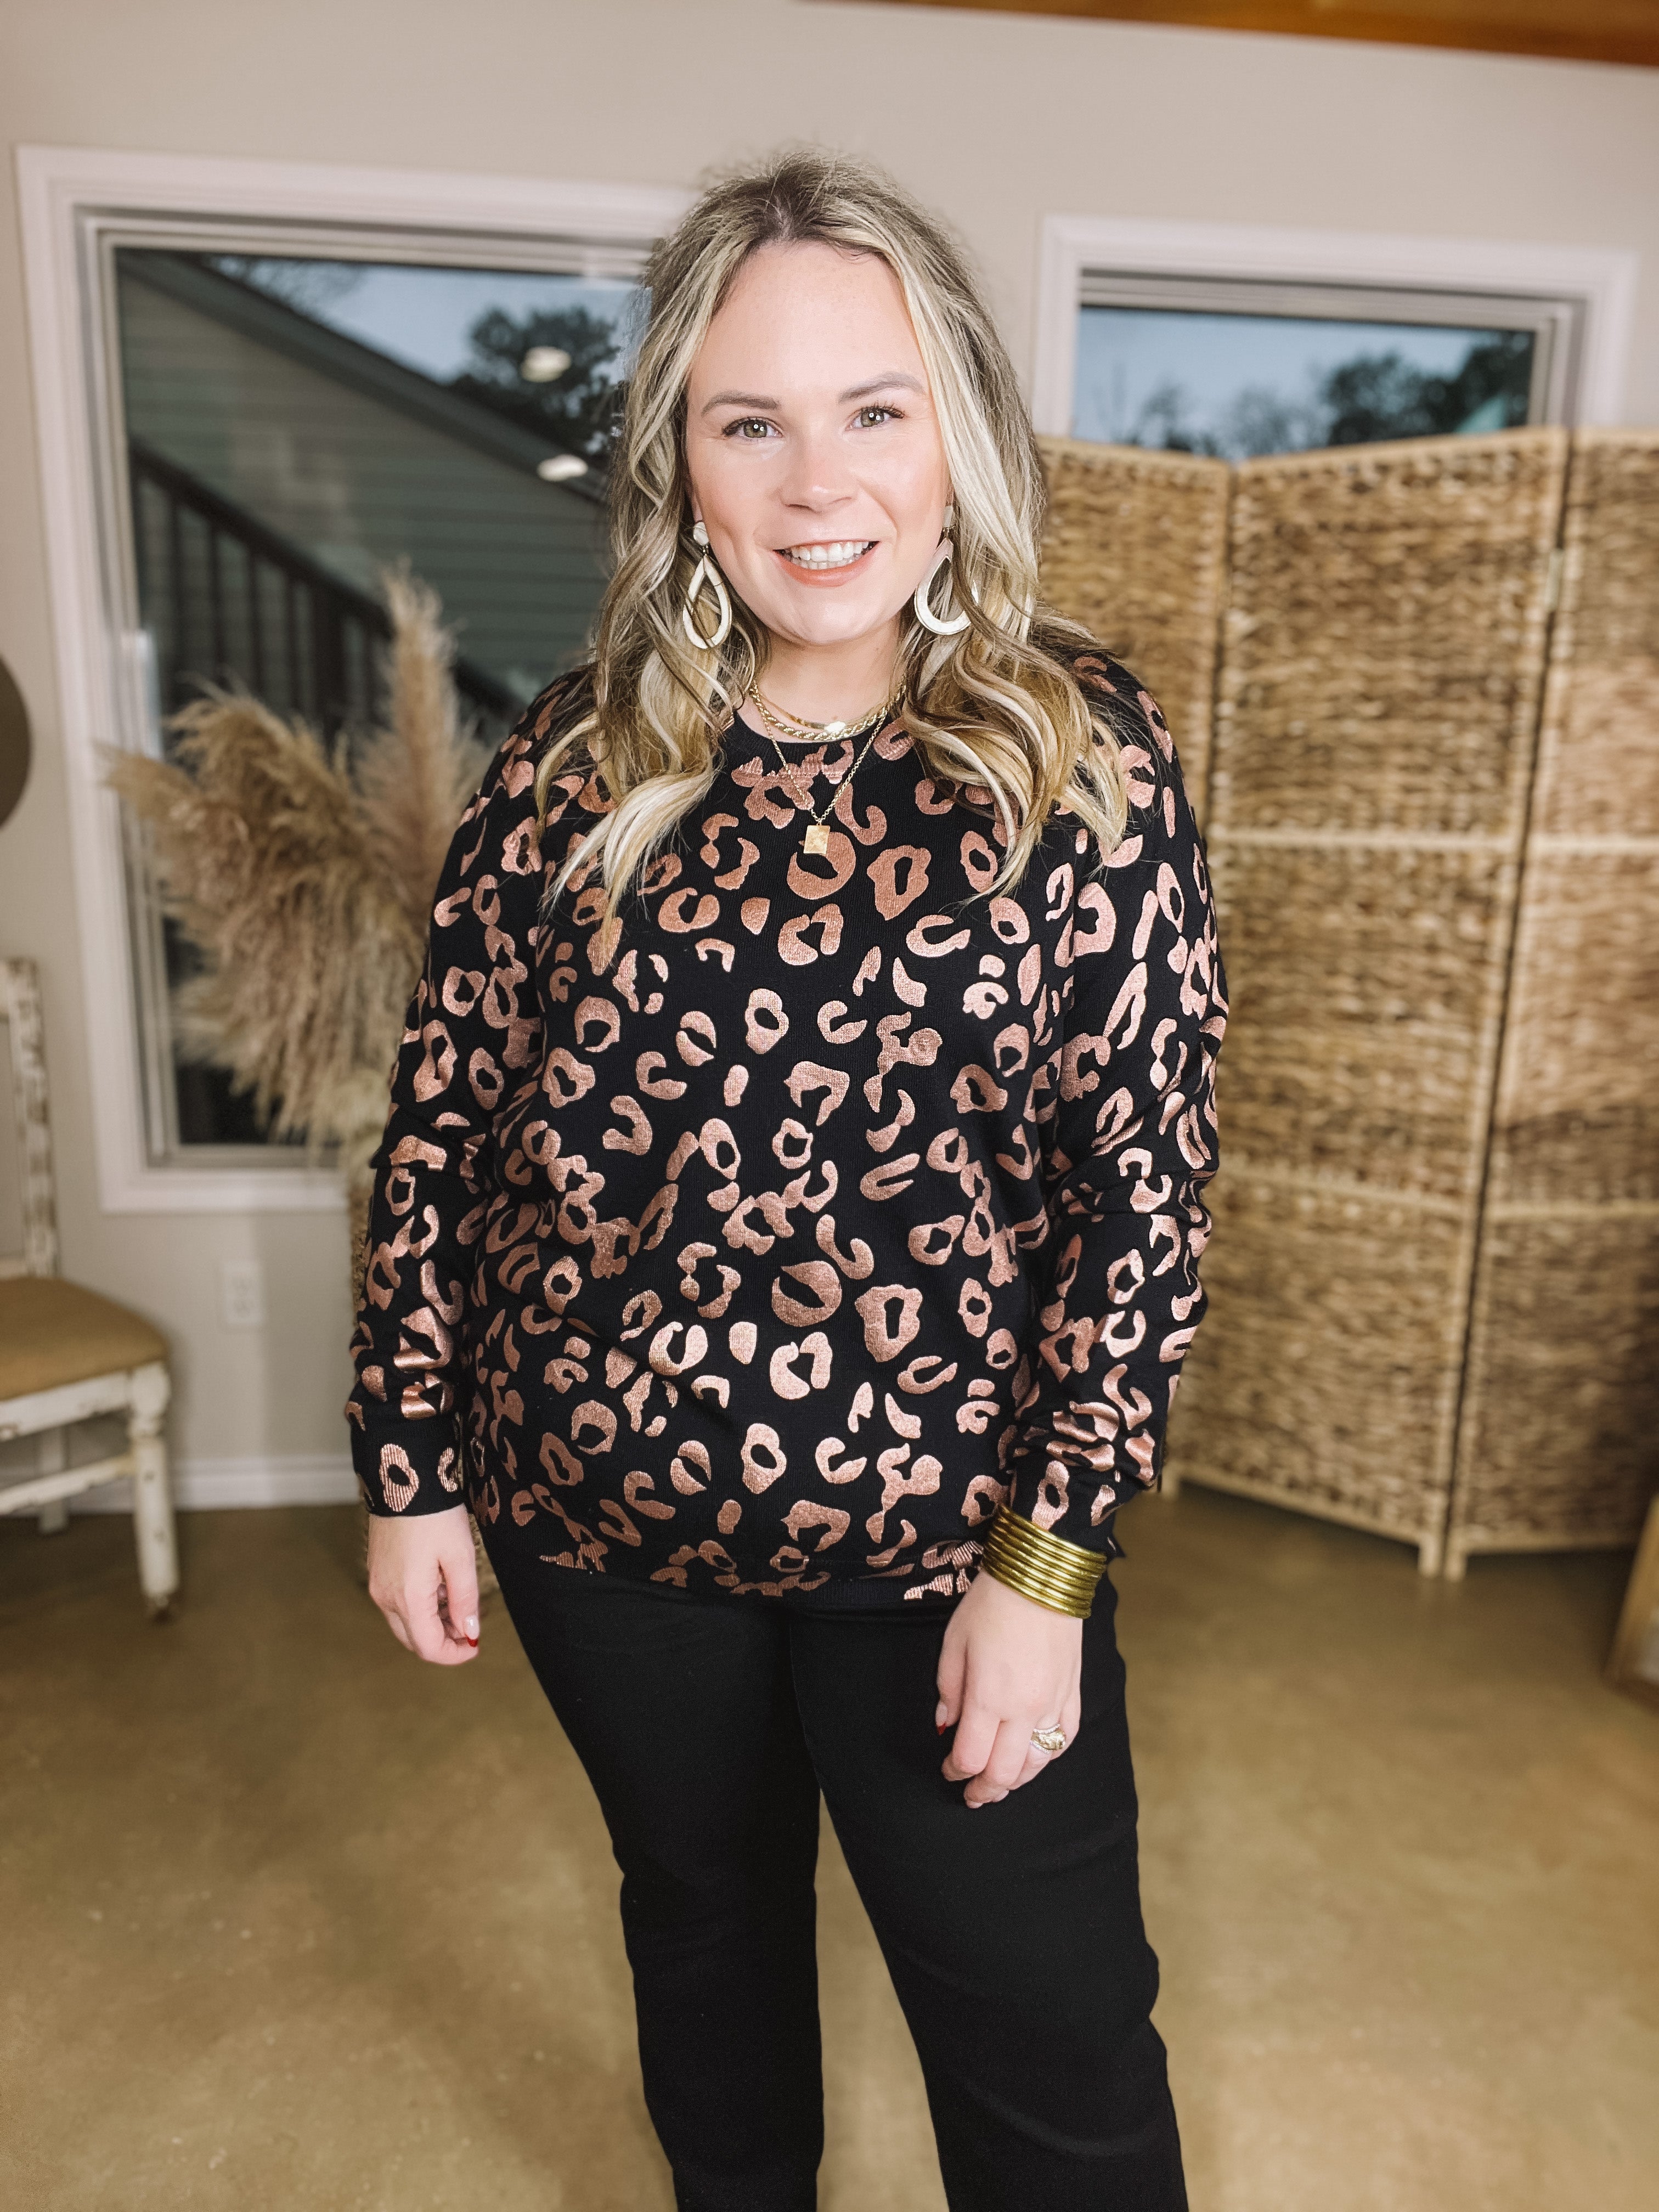 Trend Spotter Rose Metallic Leopard Print Sweater with Zipper Detail in Black - Giddy Up Glamour Boutique